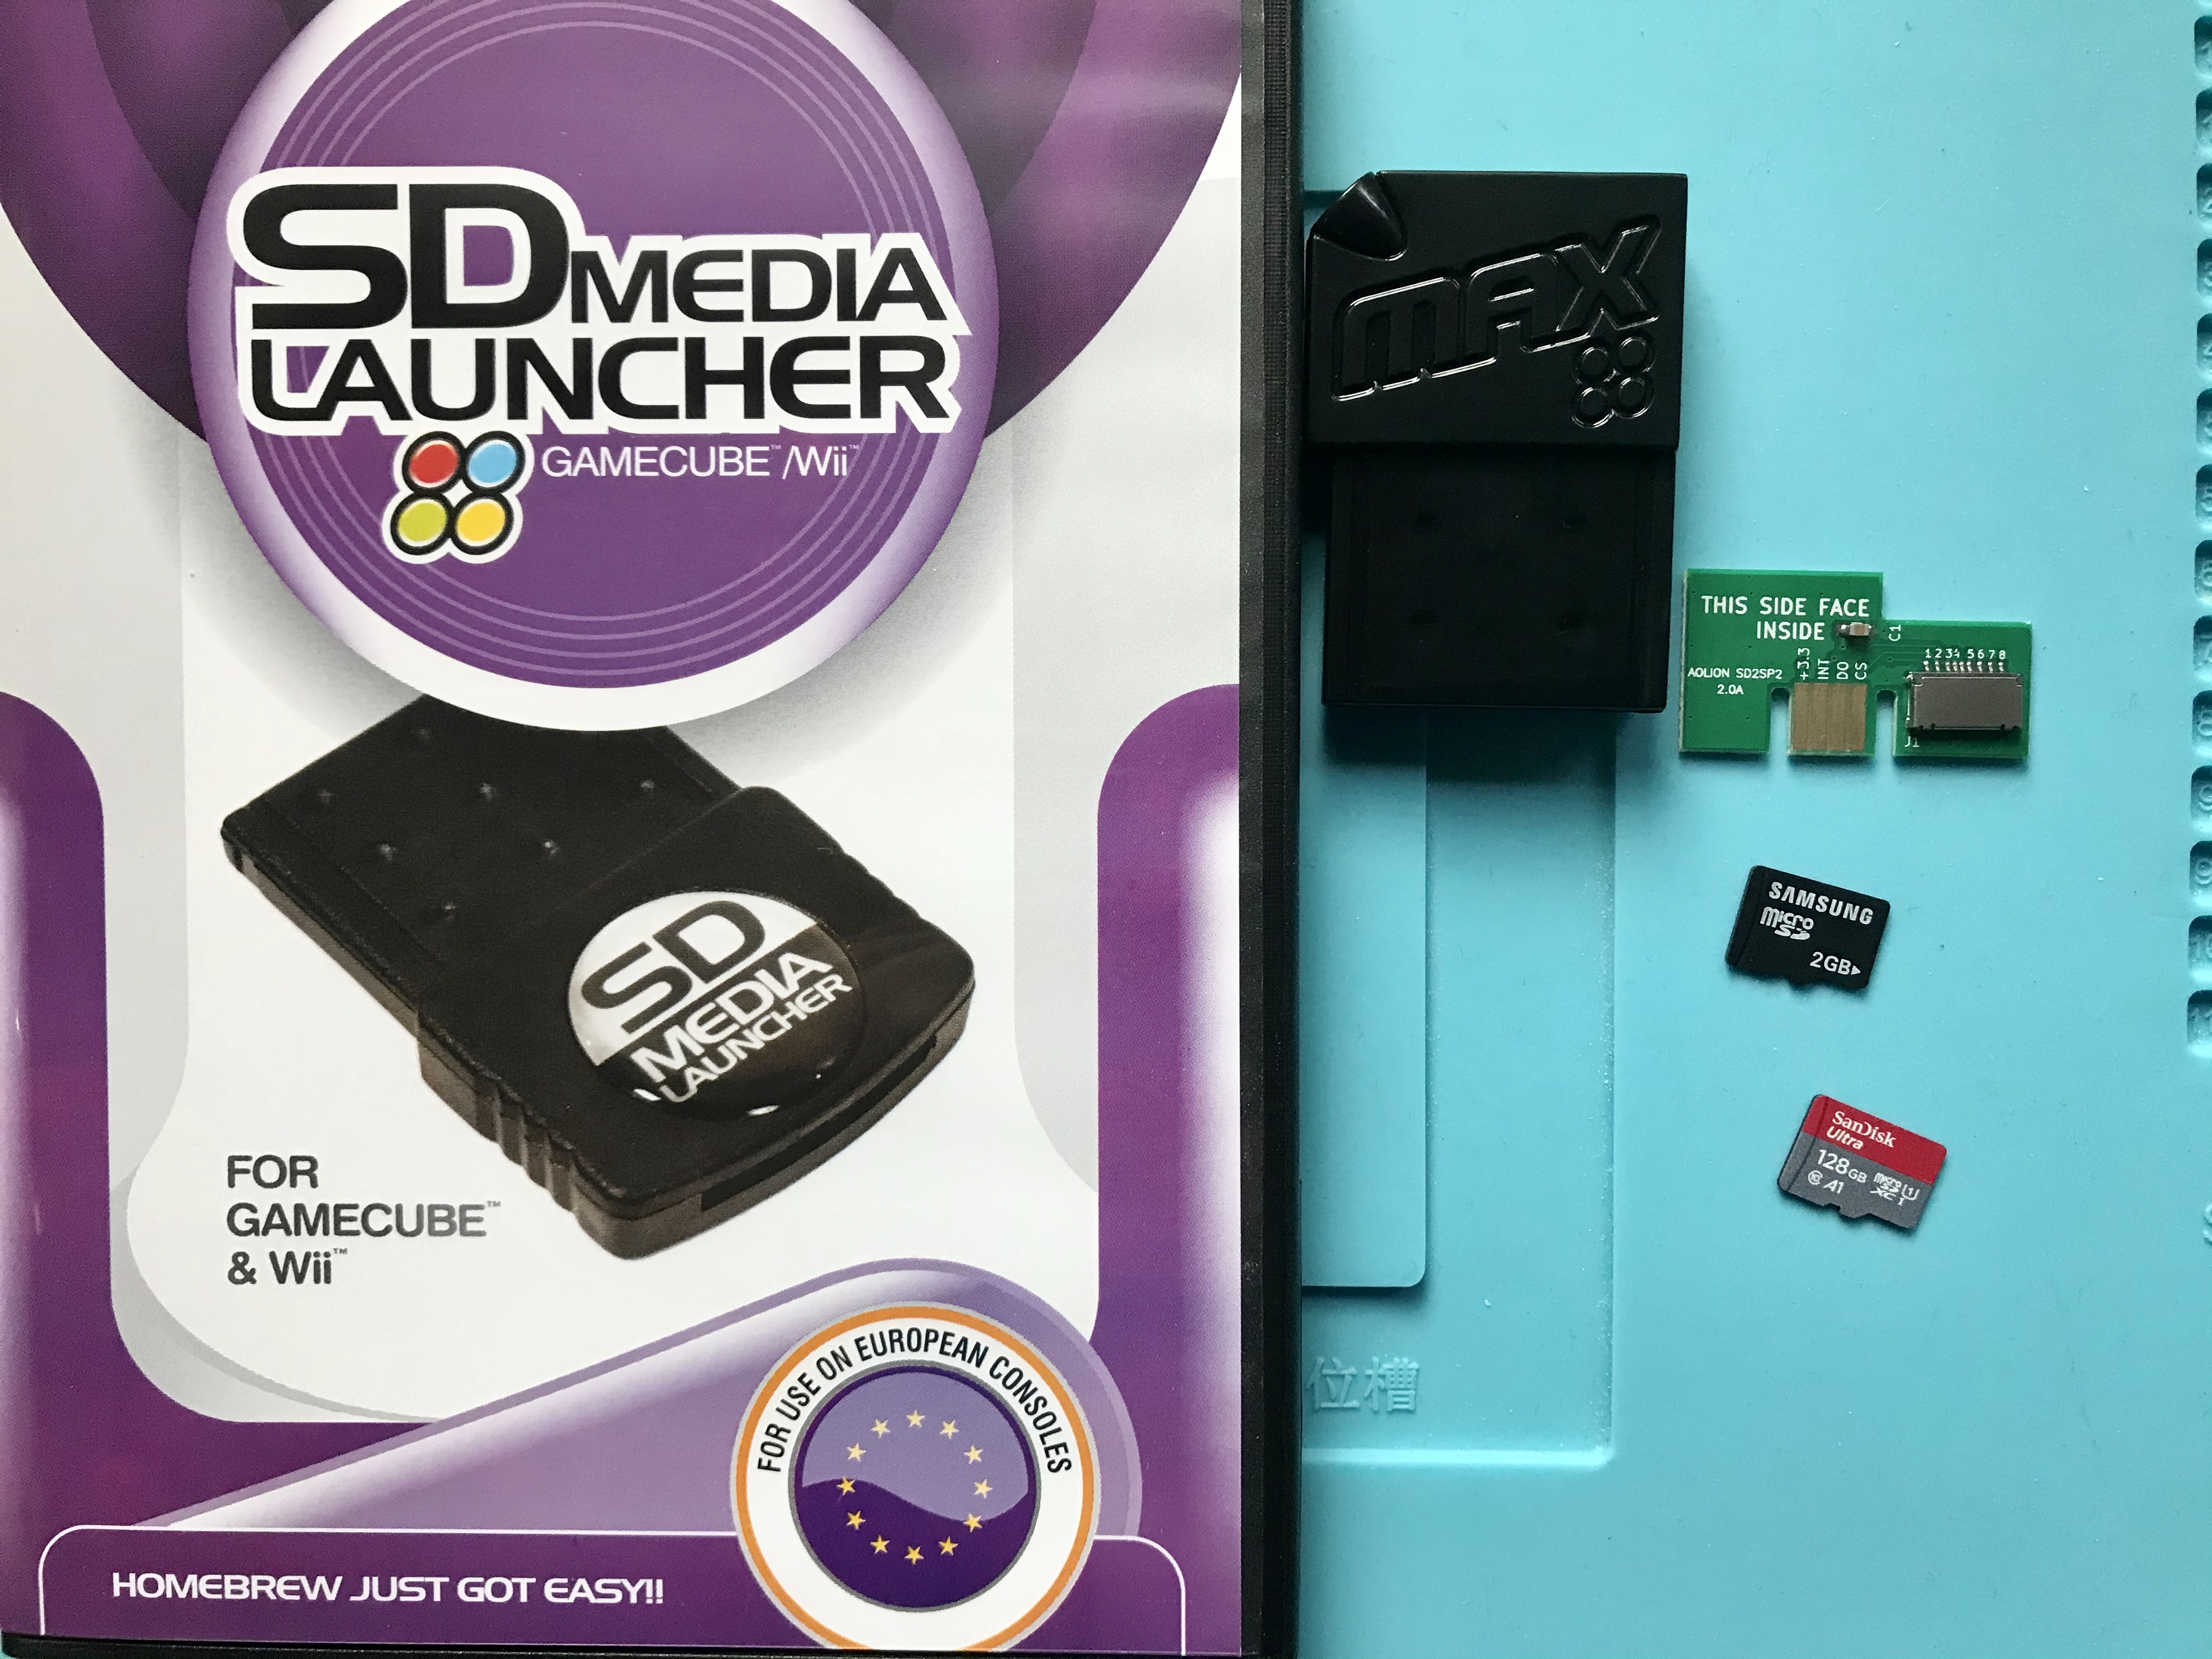 GameCube SD2SP2 and Datel SD Media Launcher